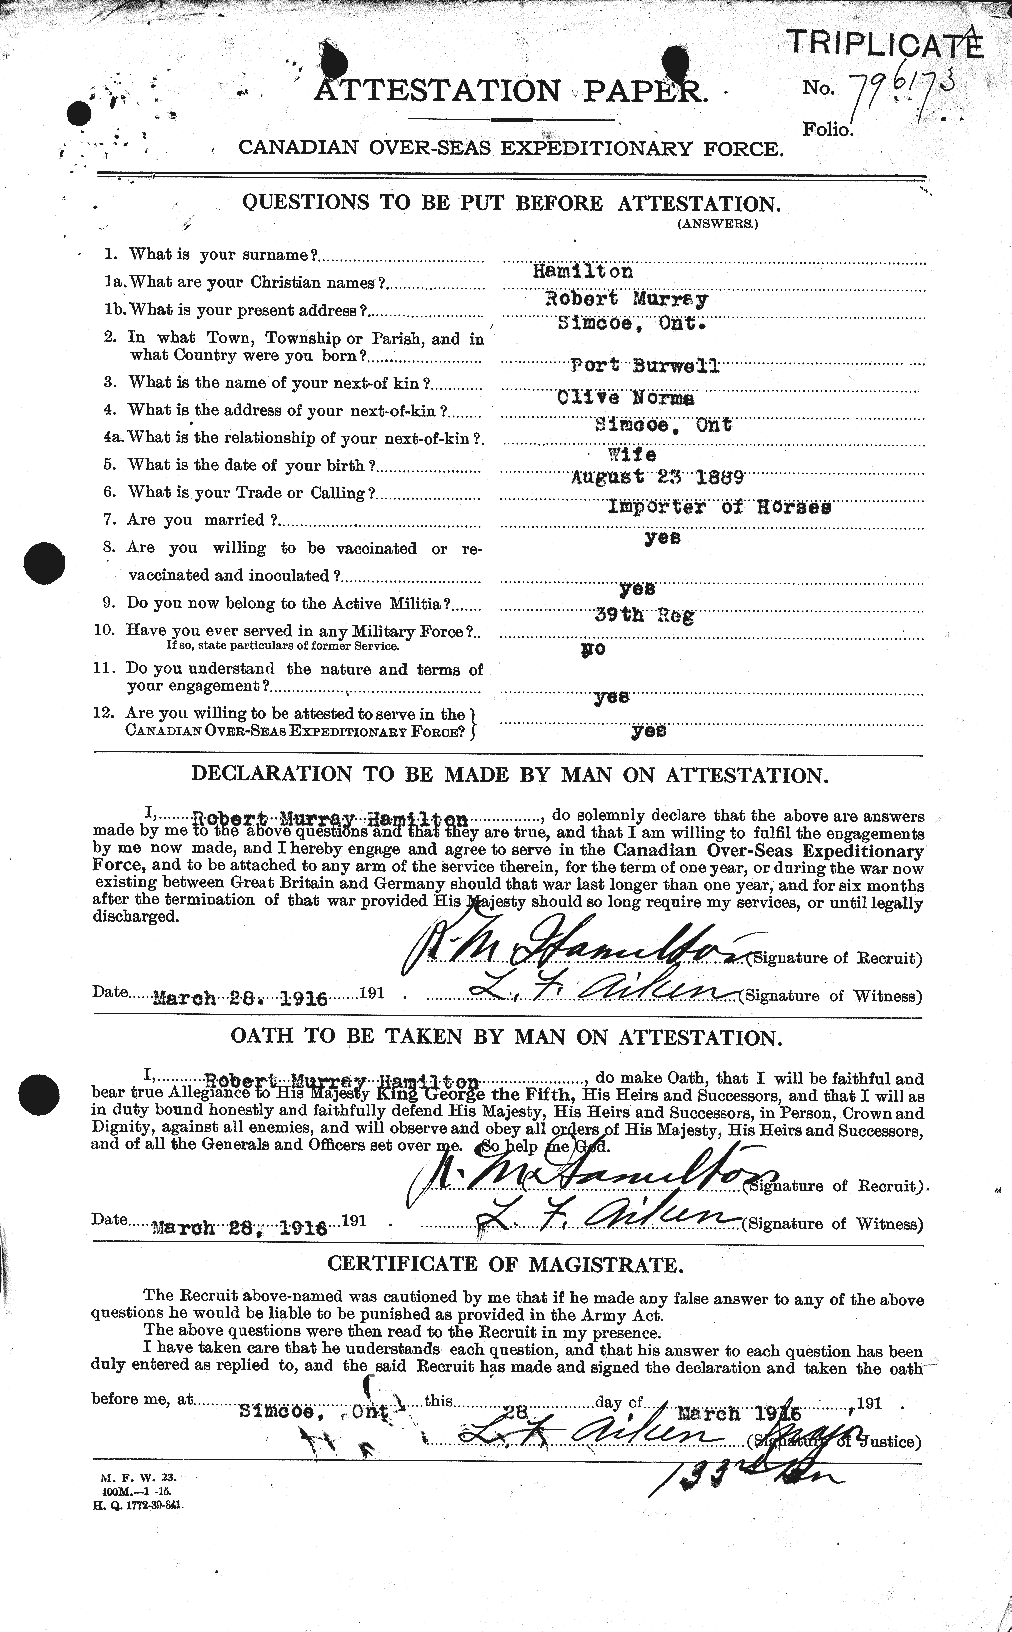 Personnel Records of the First World War - CEF 373268a